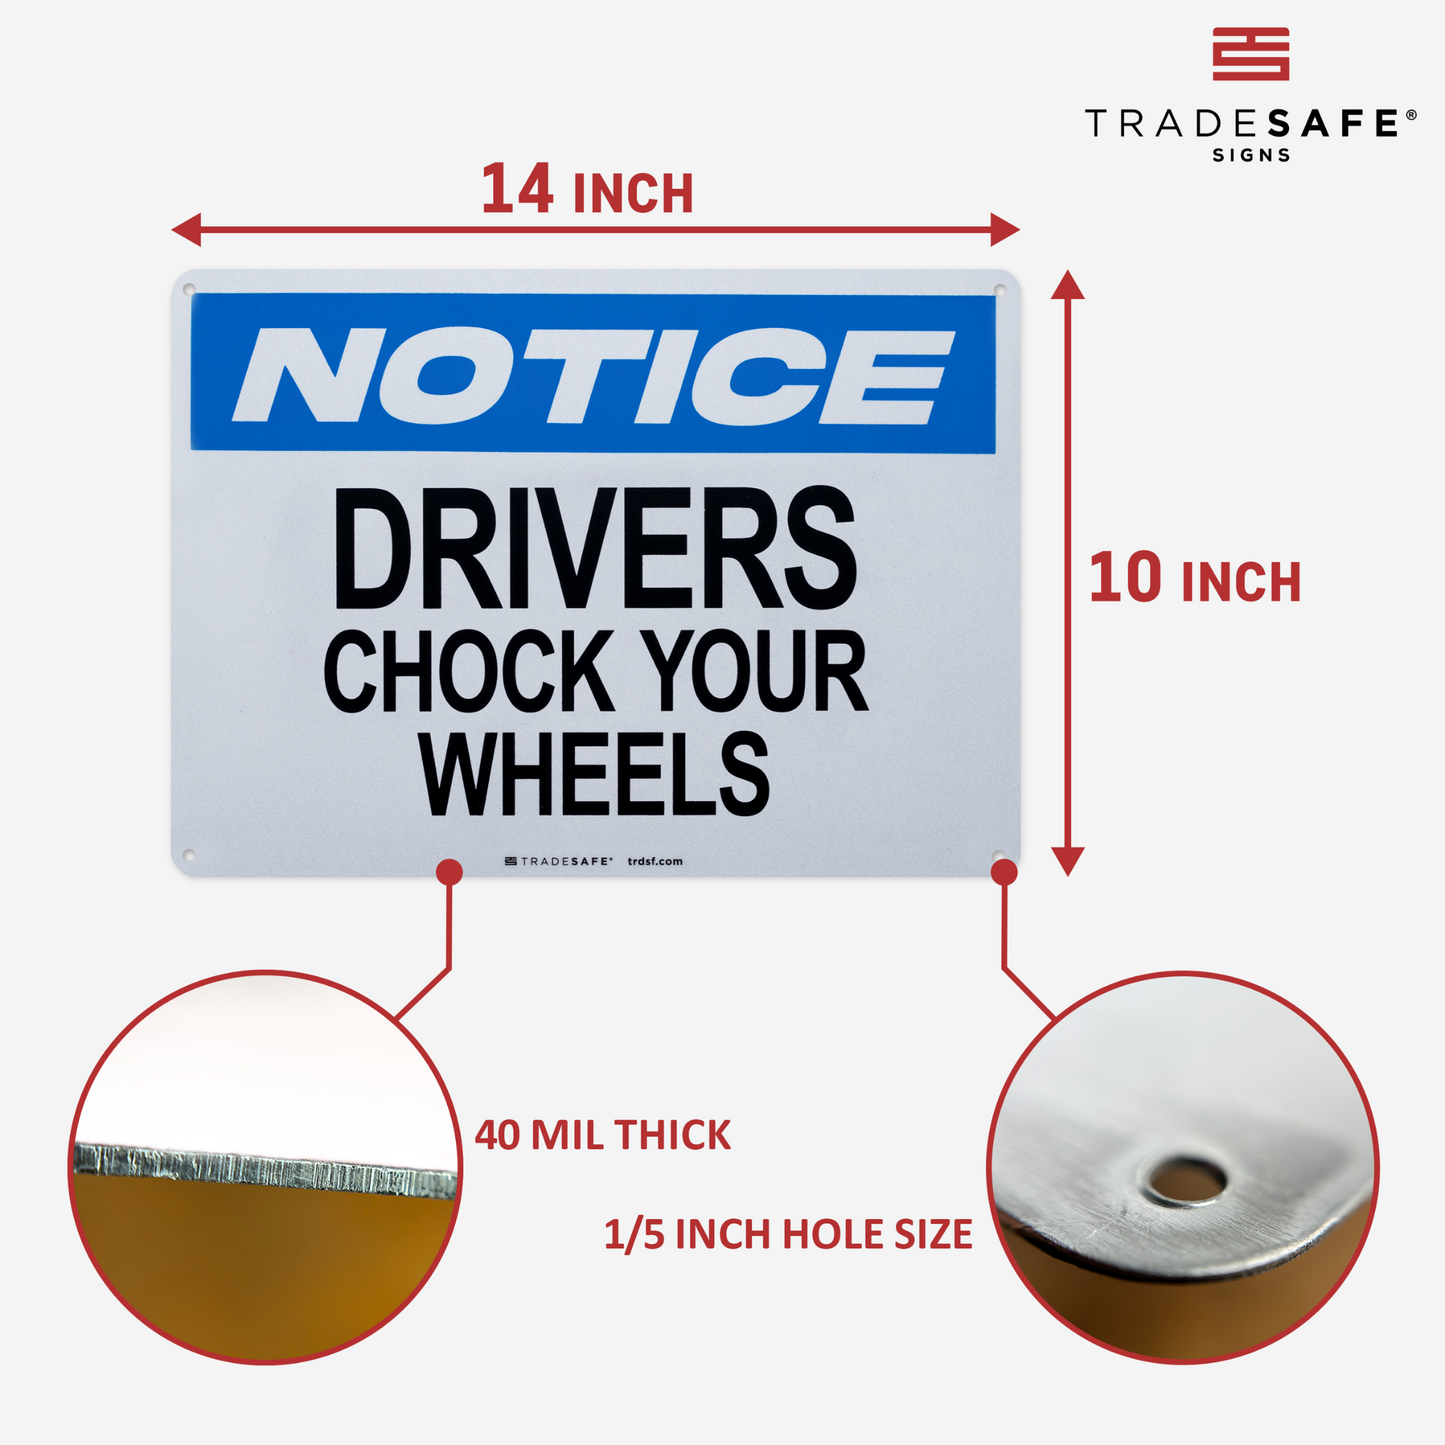 dimensions of drivers chock your wheels sign